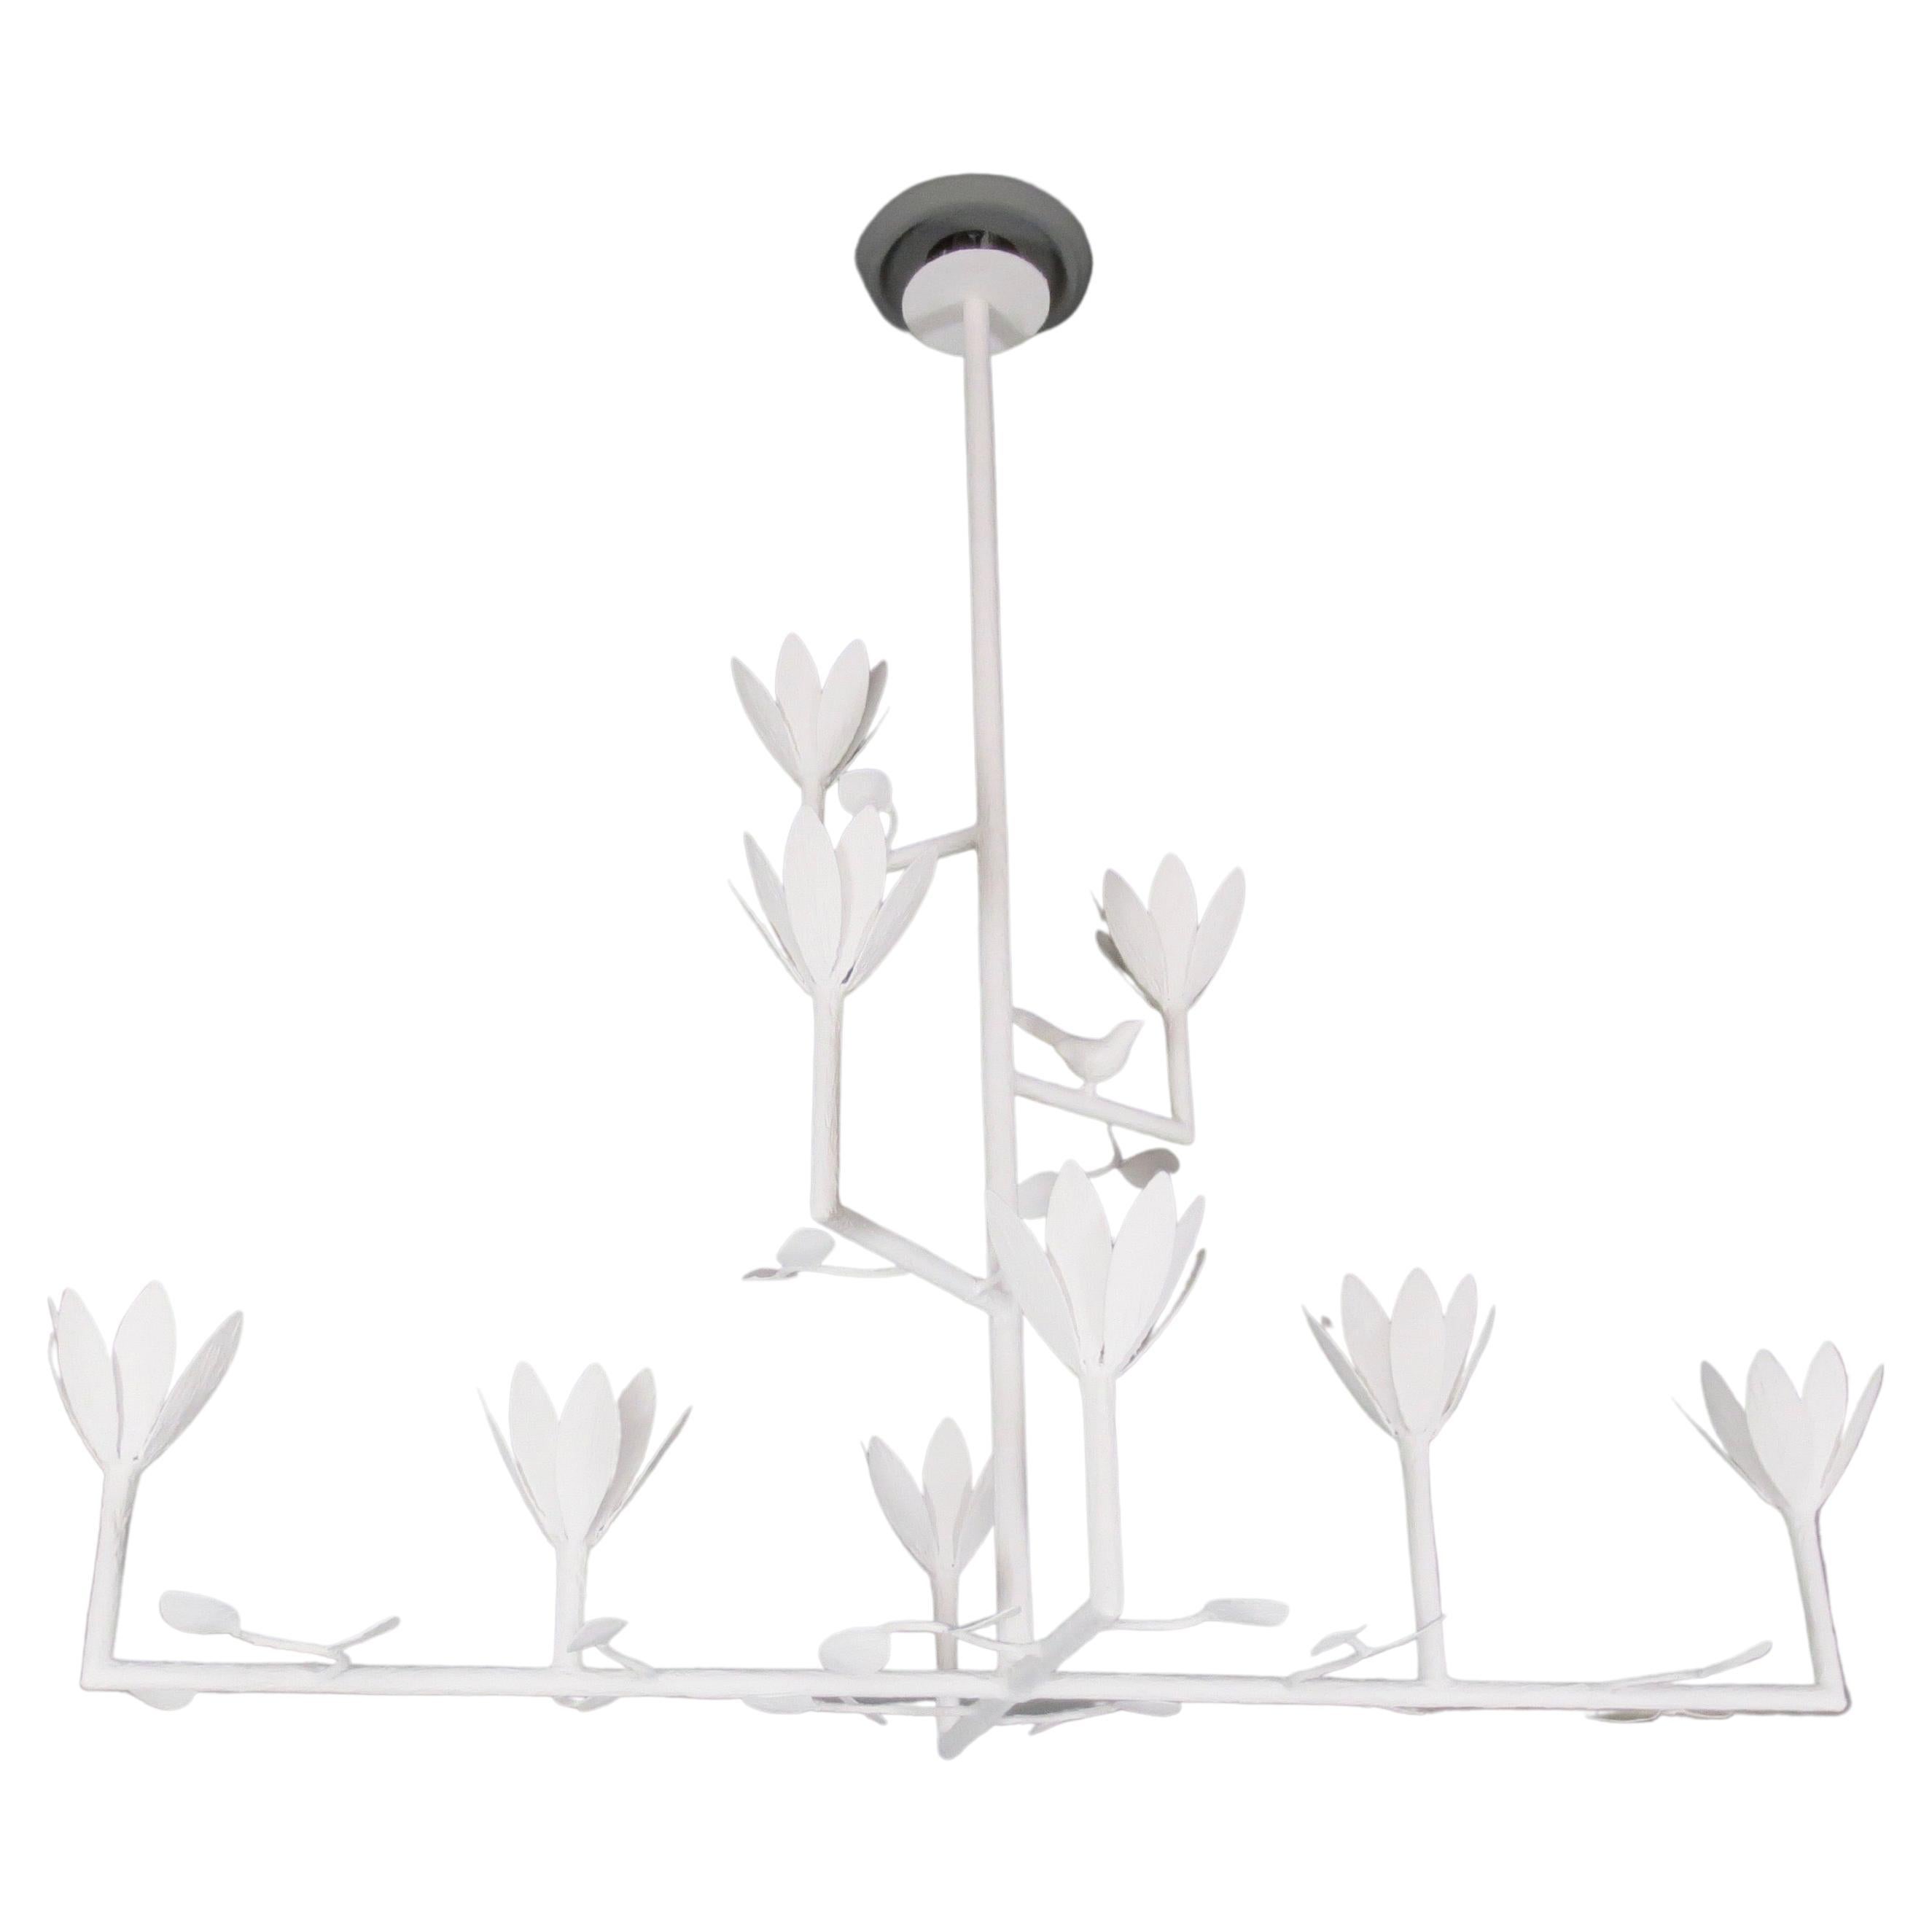 9 Bloom Cross Bar Plaster Chandelier with a Bird and Leaves For Sale